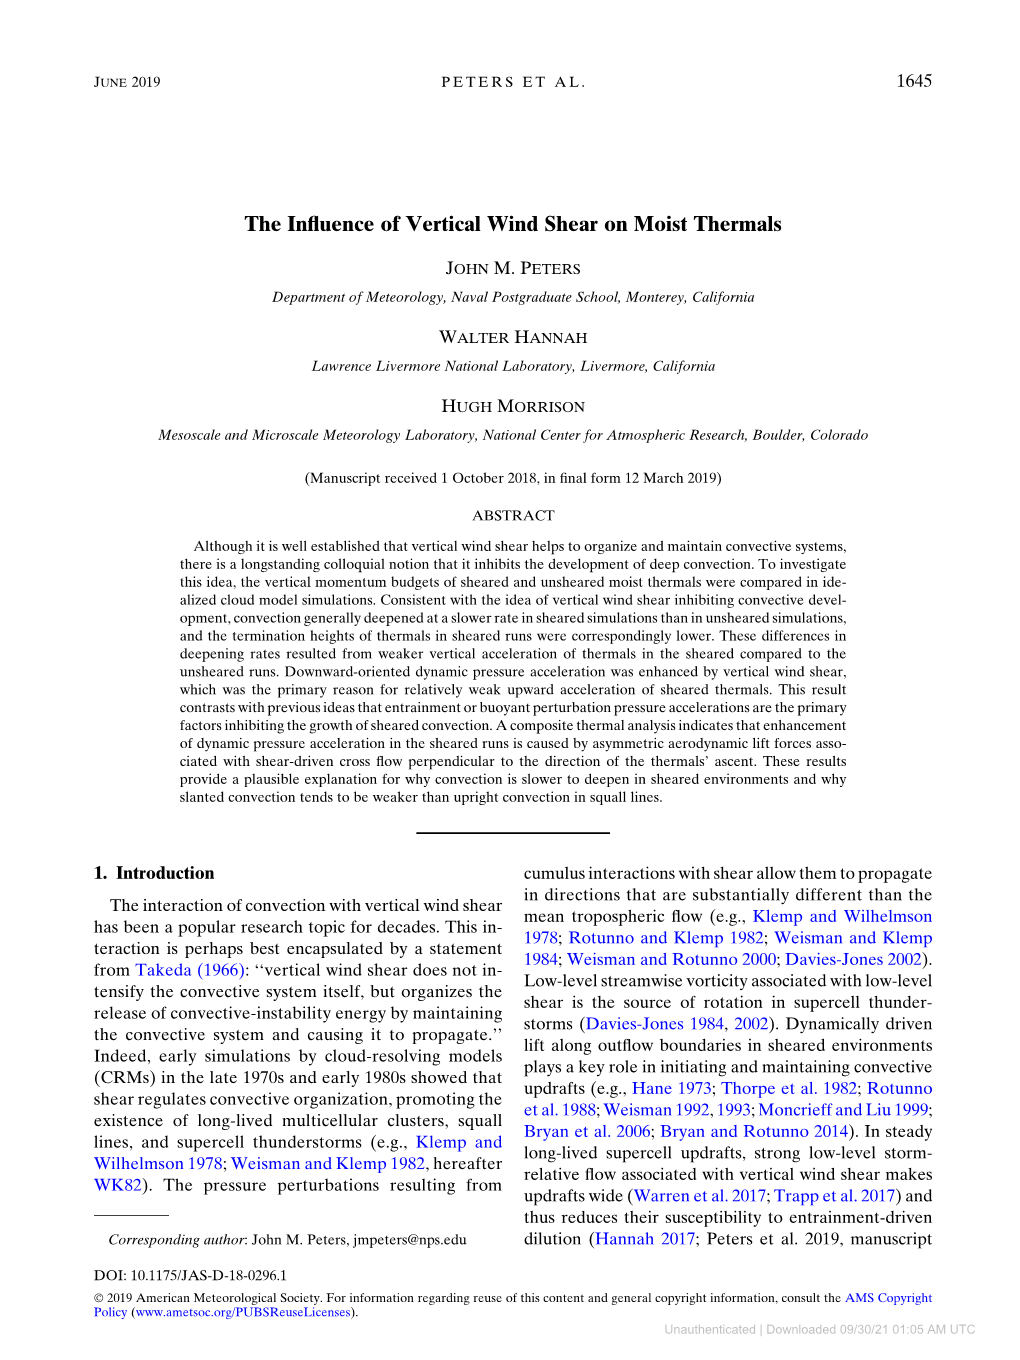 The Influence of Vertical Wind Shear on Moist Thermals